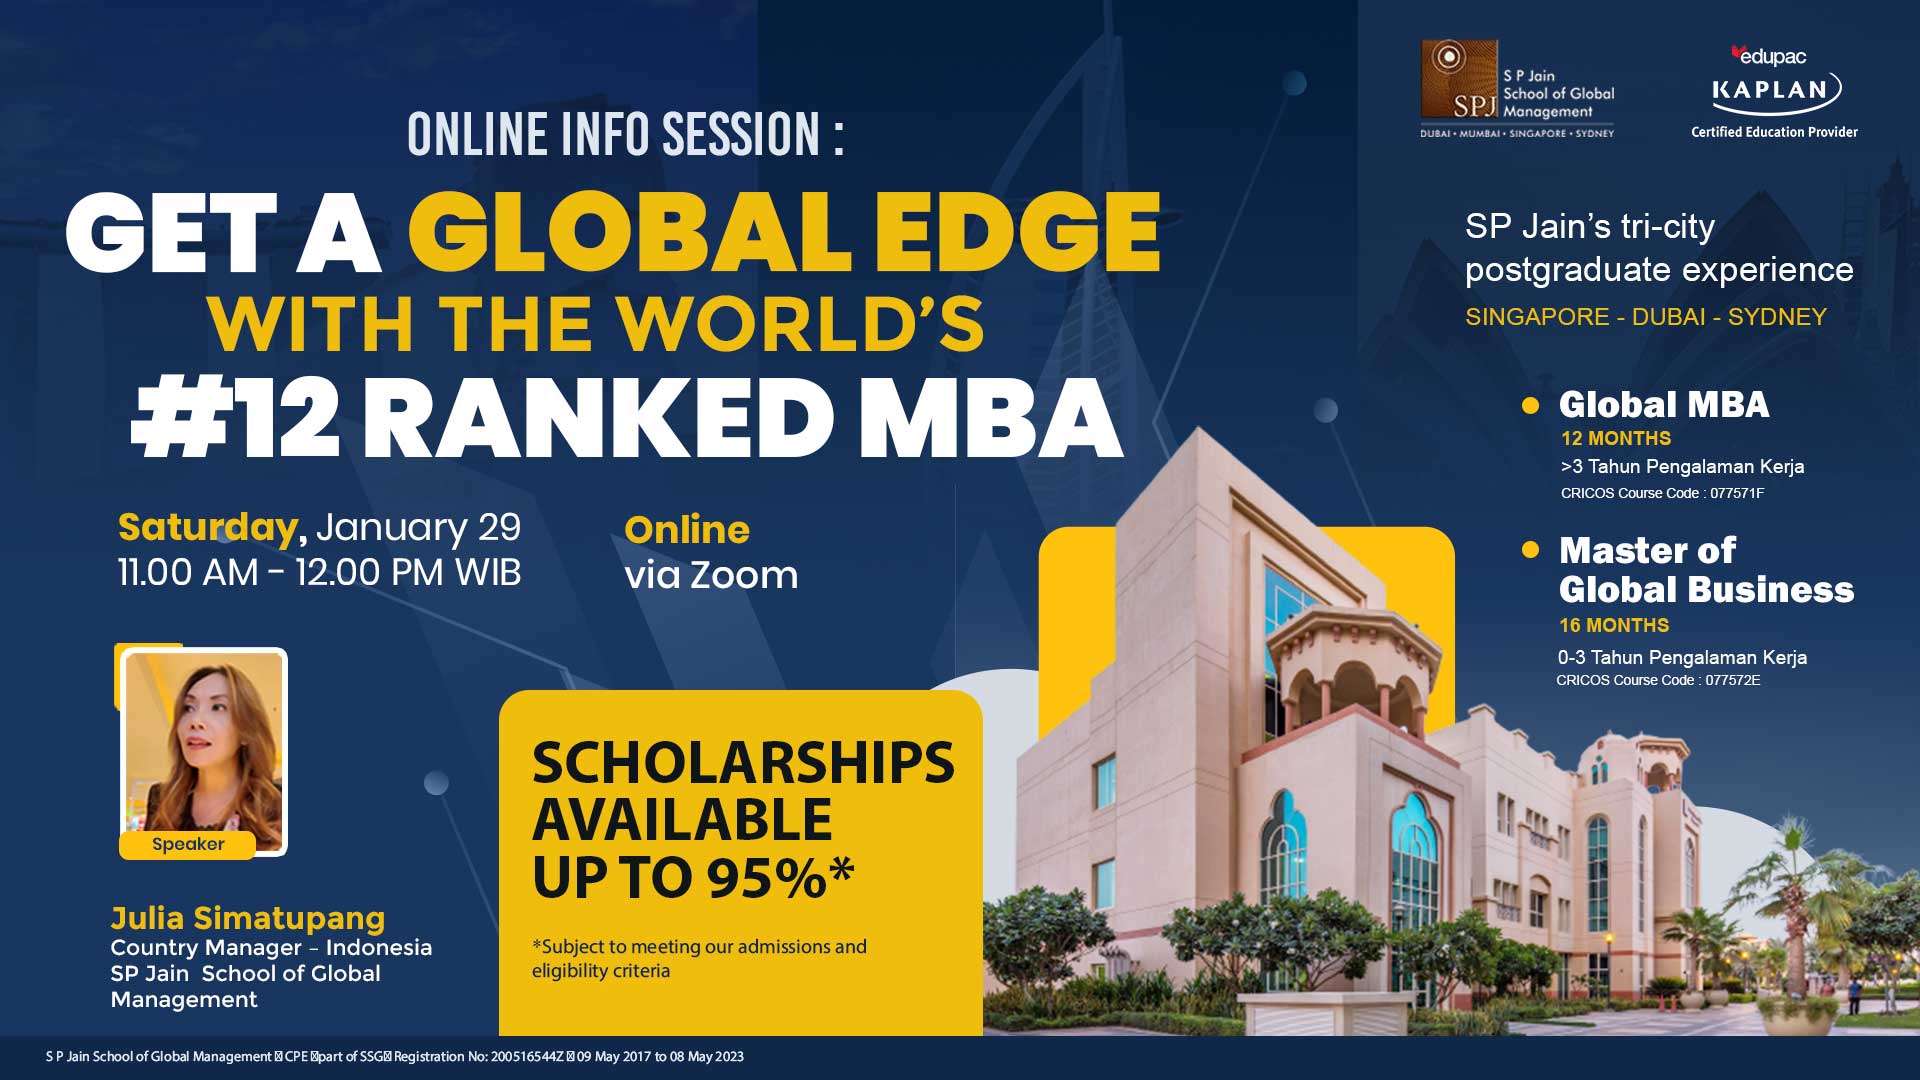 Online Info Session: Get a Global Edge with The World's #12 Ranked MBA - Scholarship up to 95% 